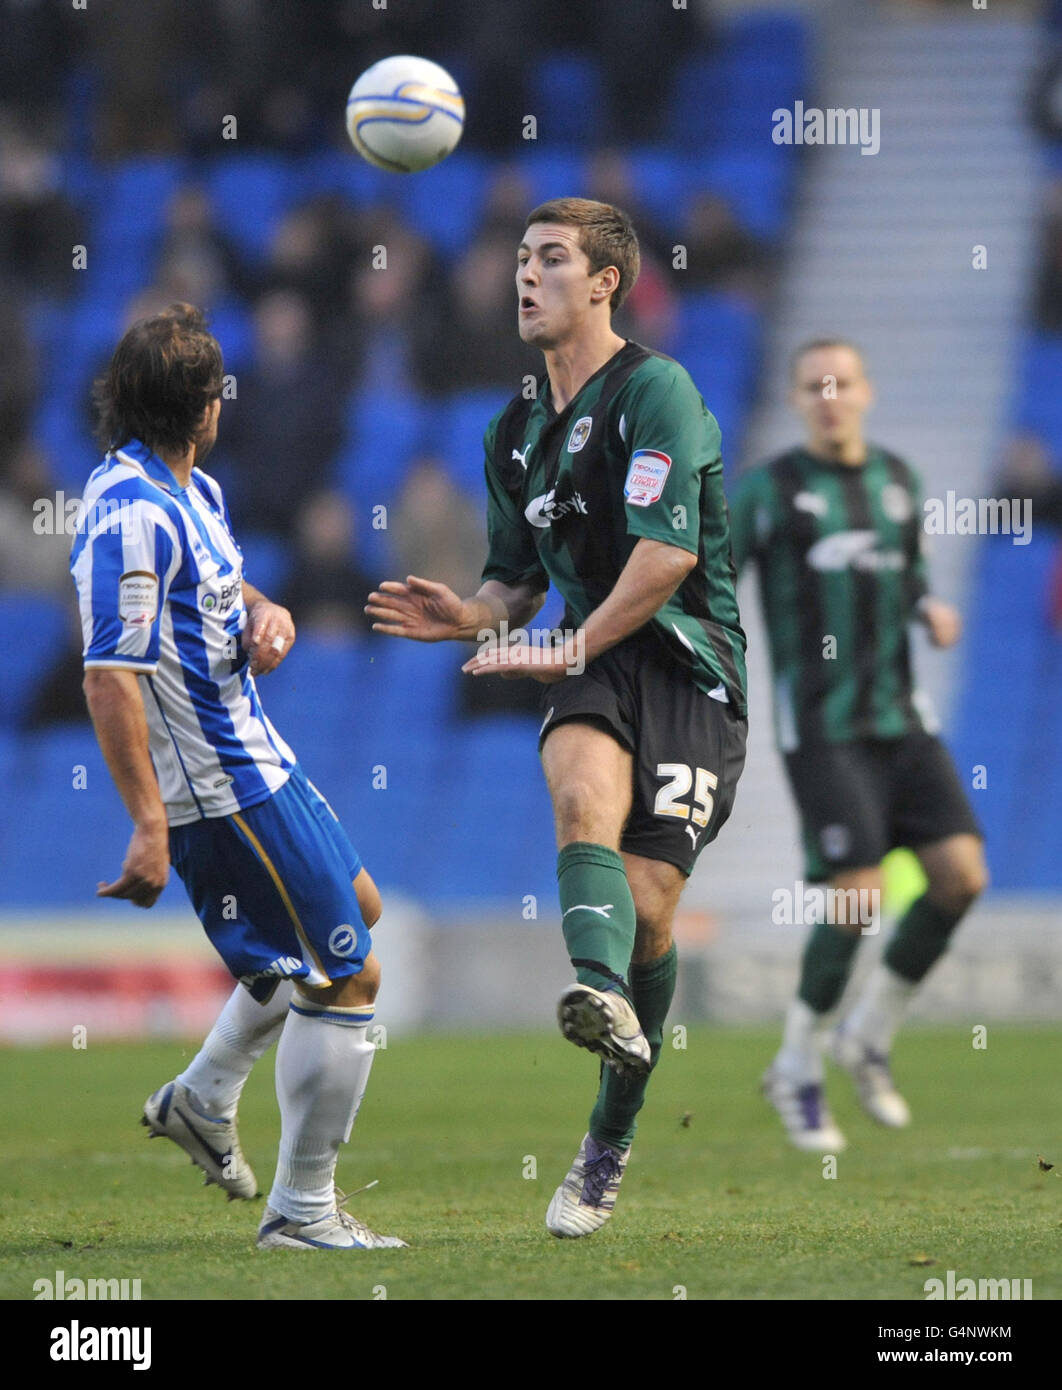 Brighton & Hove Albion's Inigo Calderon and Coventry City's Gary Gardner battle for the ball during the npower Football League Championship match at the AMEX Stadium, Brighton. Stock Photo